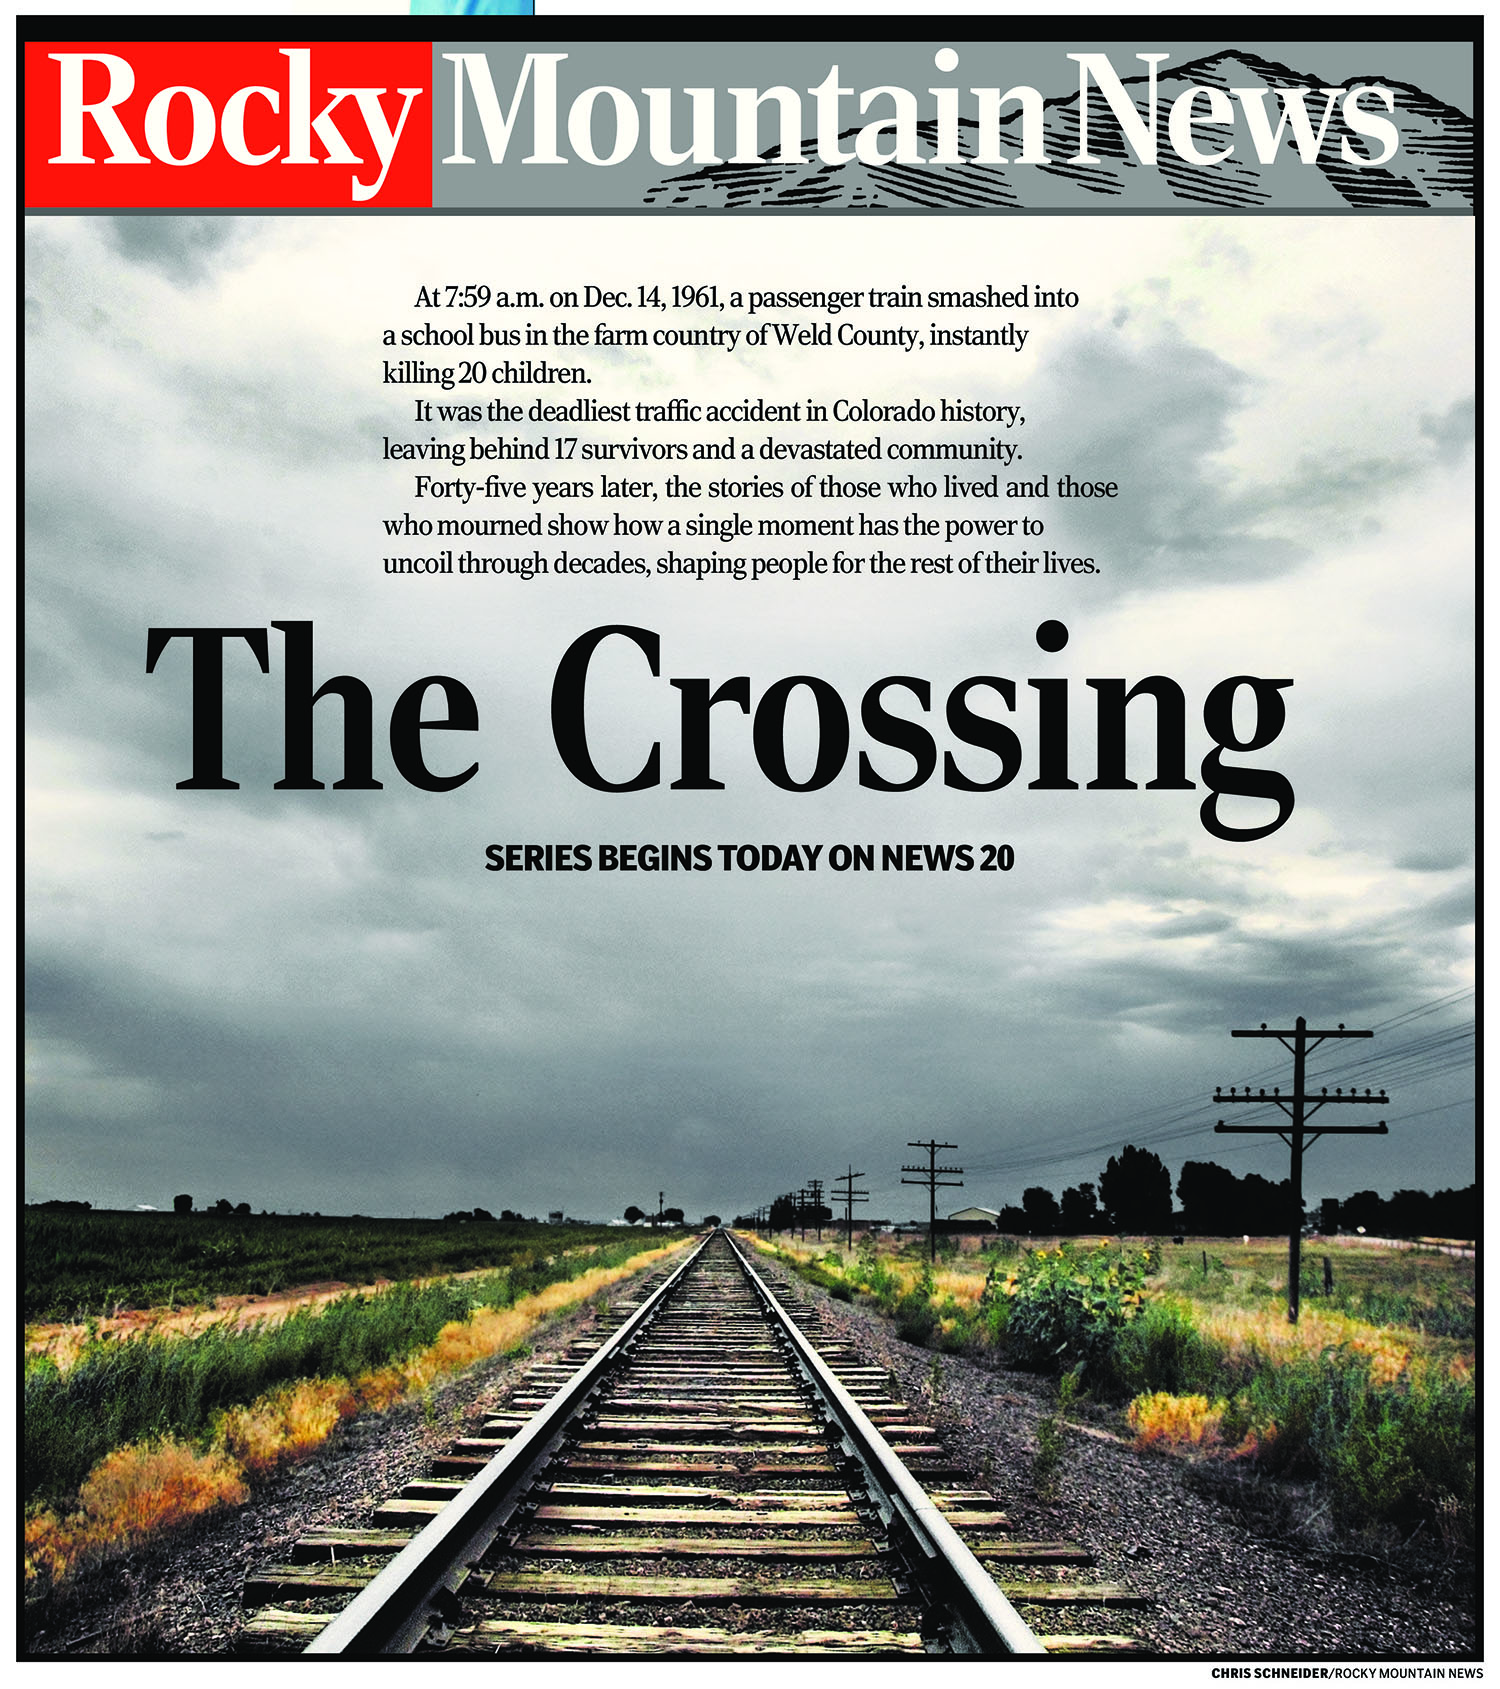 The cover of the first chapter of Rocky Mountain News' "The Crossing."